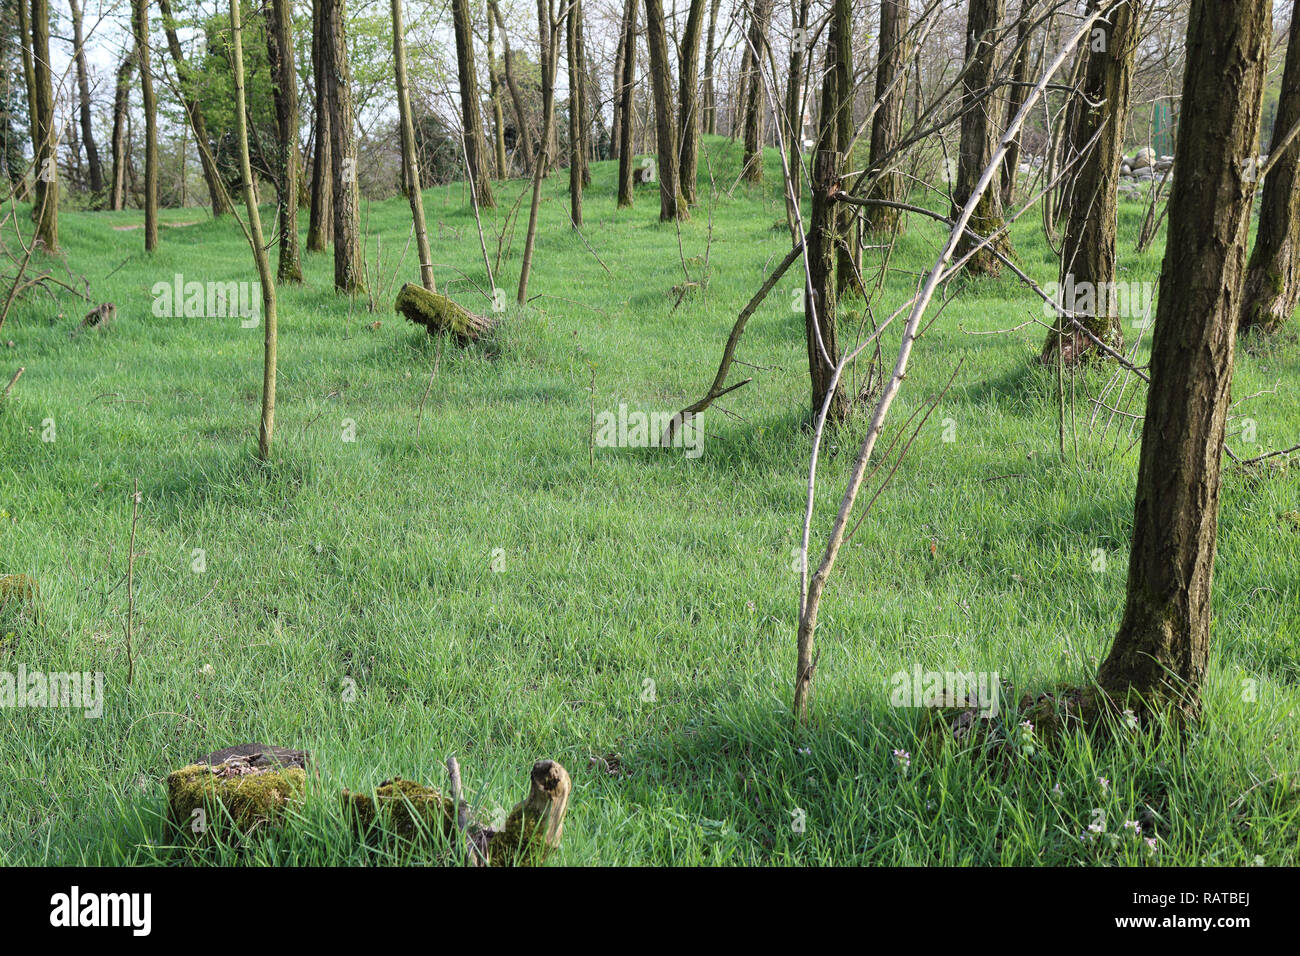 A lawn with mowed grass, some stumps, trunks with bark and branches at sunrise during spring in Cameri, Piedmont region, Italy Stock Photo